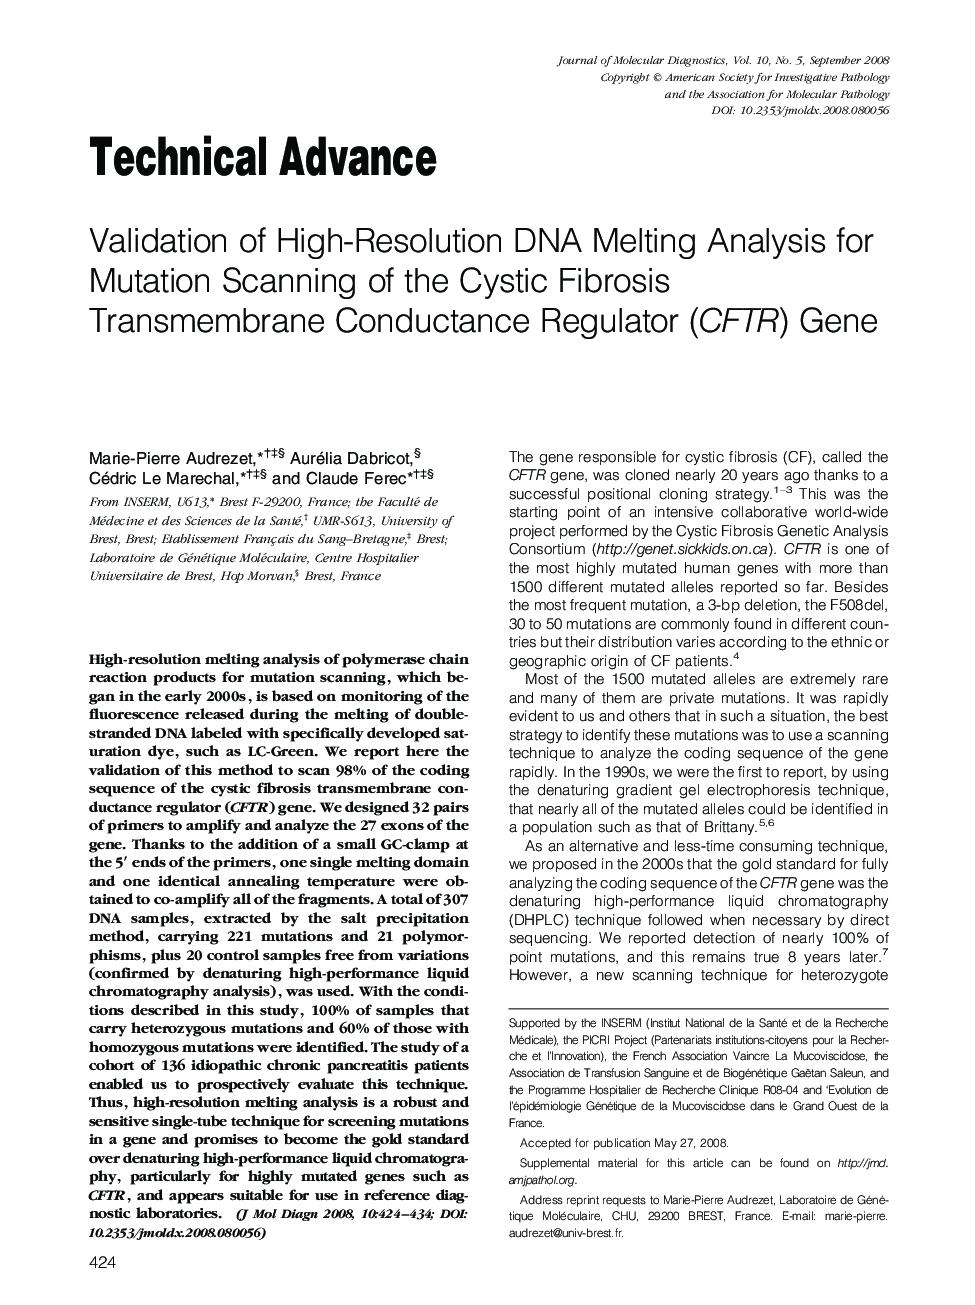 Validation of High-Resolution DNA Melting Analysis for Mutation Scanning of the Cystic Fibrosis Transmembrane Conductance Regulator (CFTR) Gene 